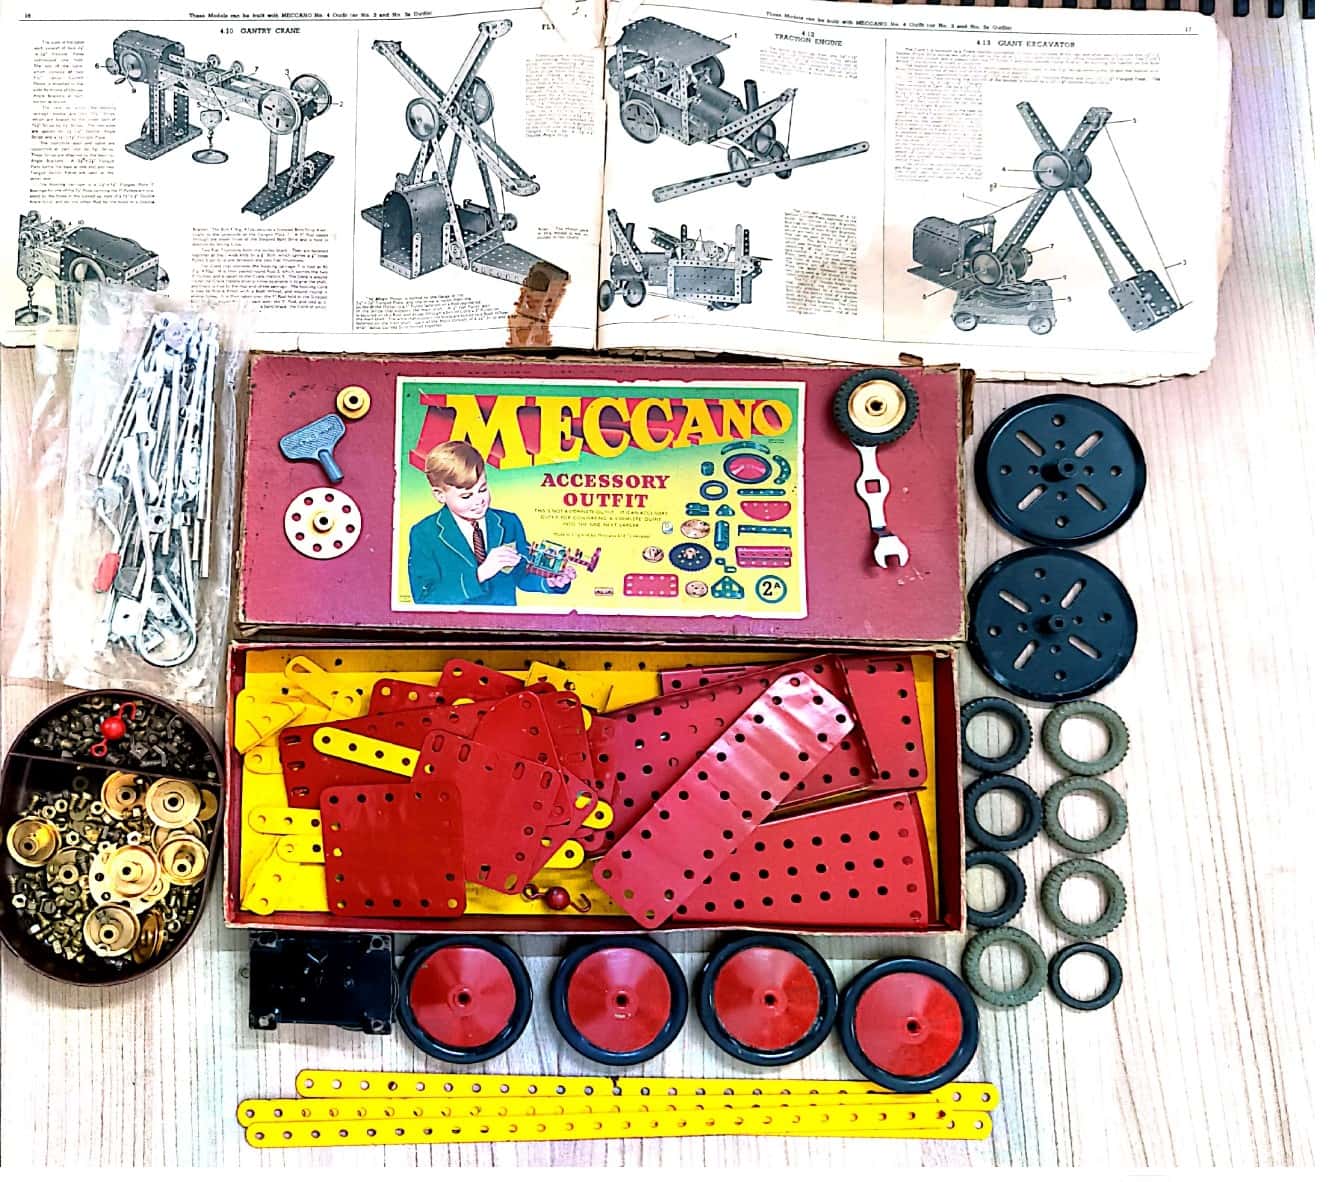 The 1952 Meccano set given to Ramji by his father